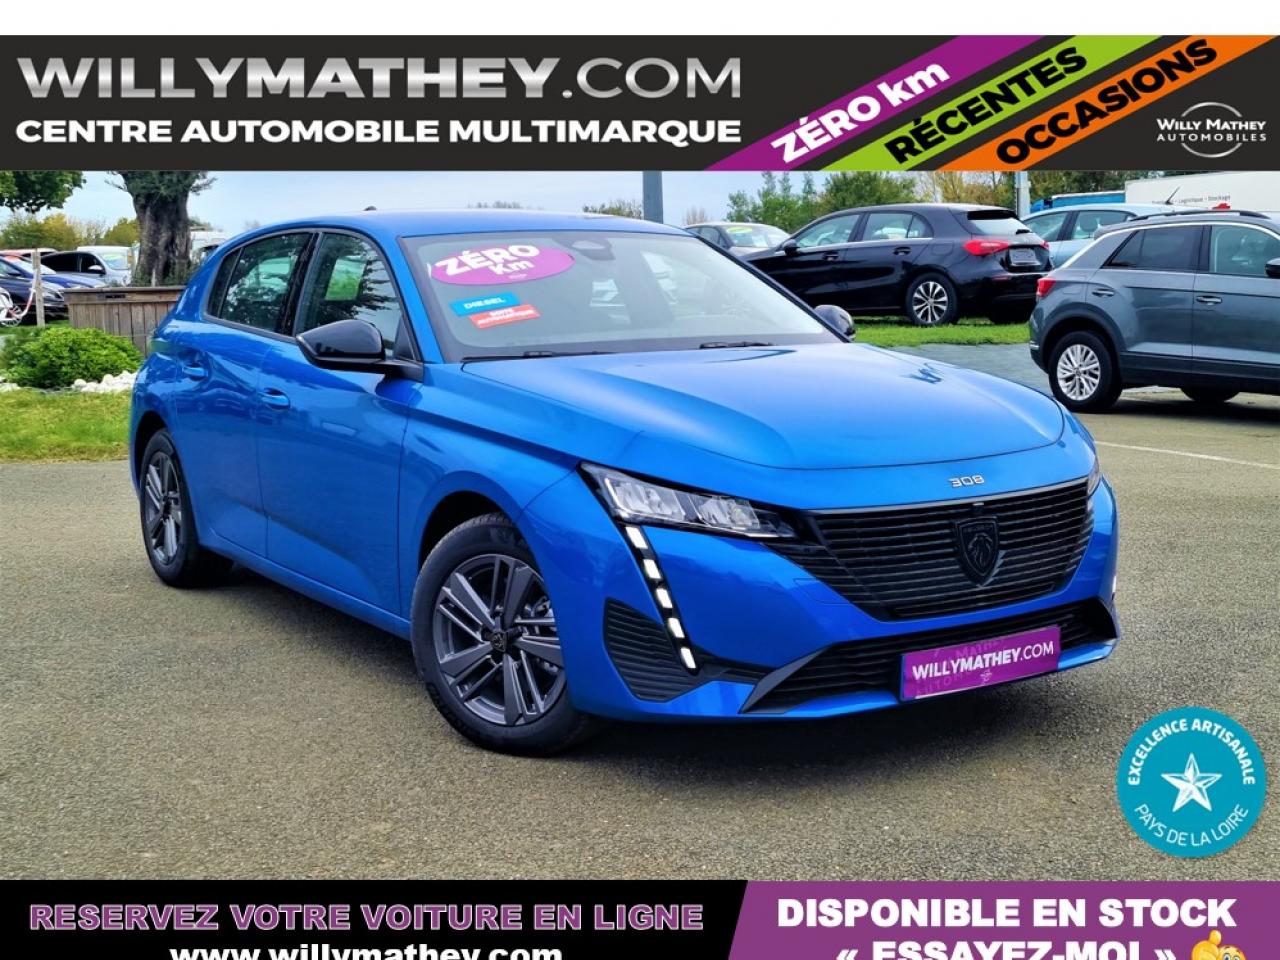 serie Indica Conventie WILLY MATHEY AUTOMOBILES - PEUGEOT-308-DIESEL 130CV BOITE AUTOMATIQUE  ACTIVE PACK